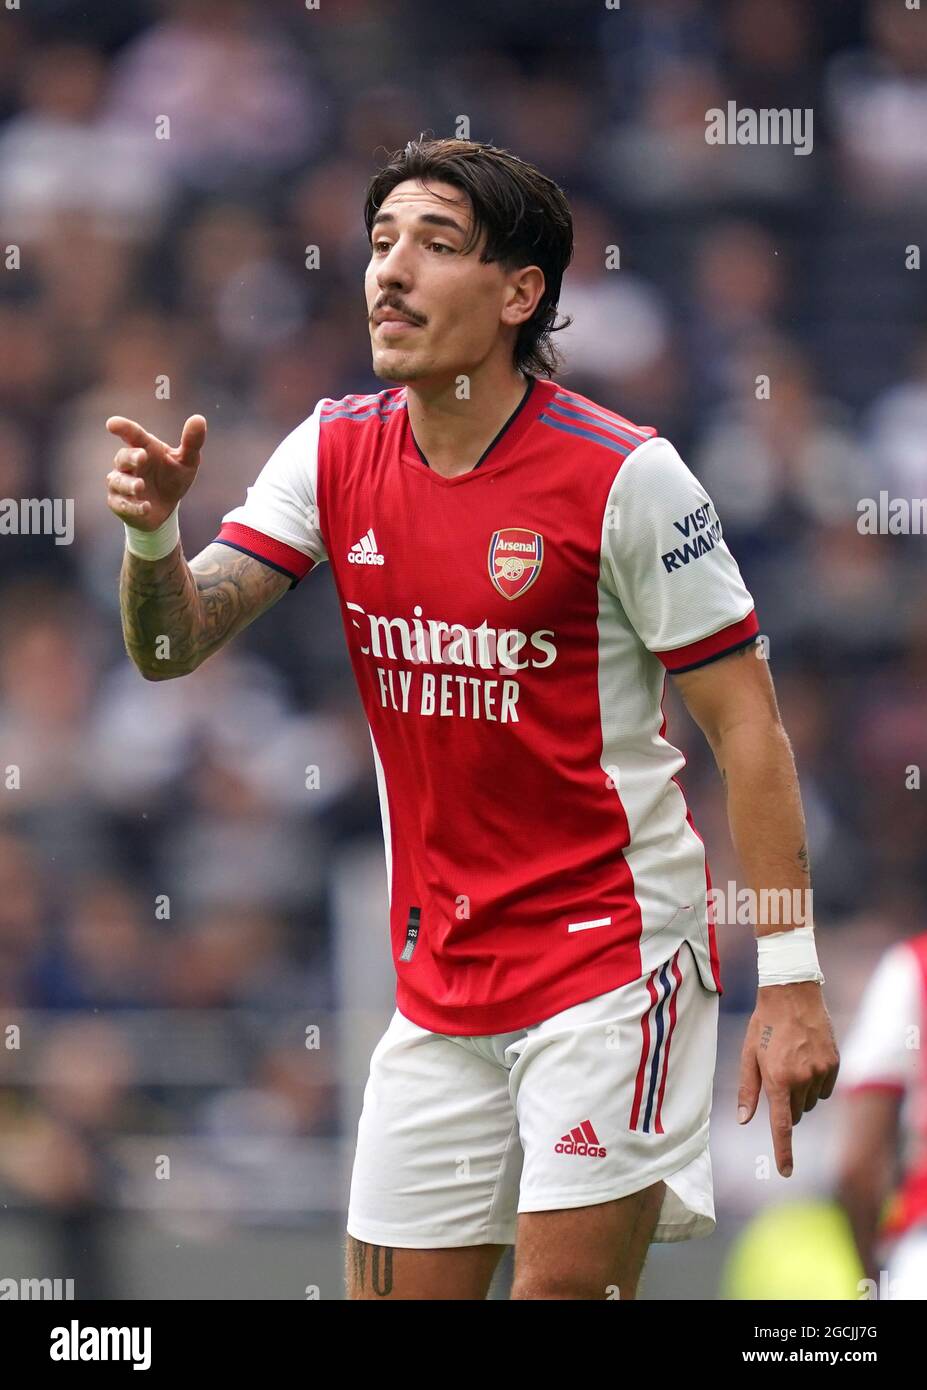 Arsenal star Hector Bellerin all smiles with his girlfriend - 7M sport